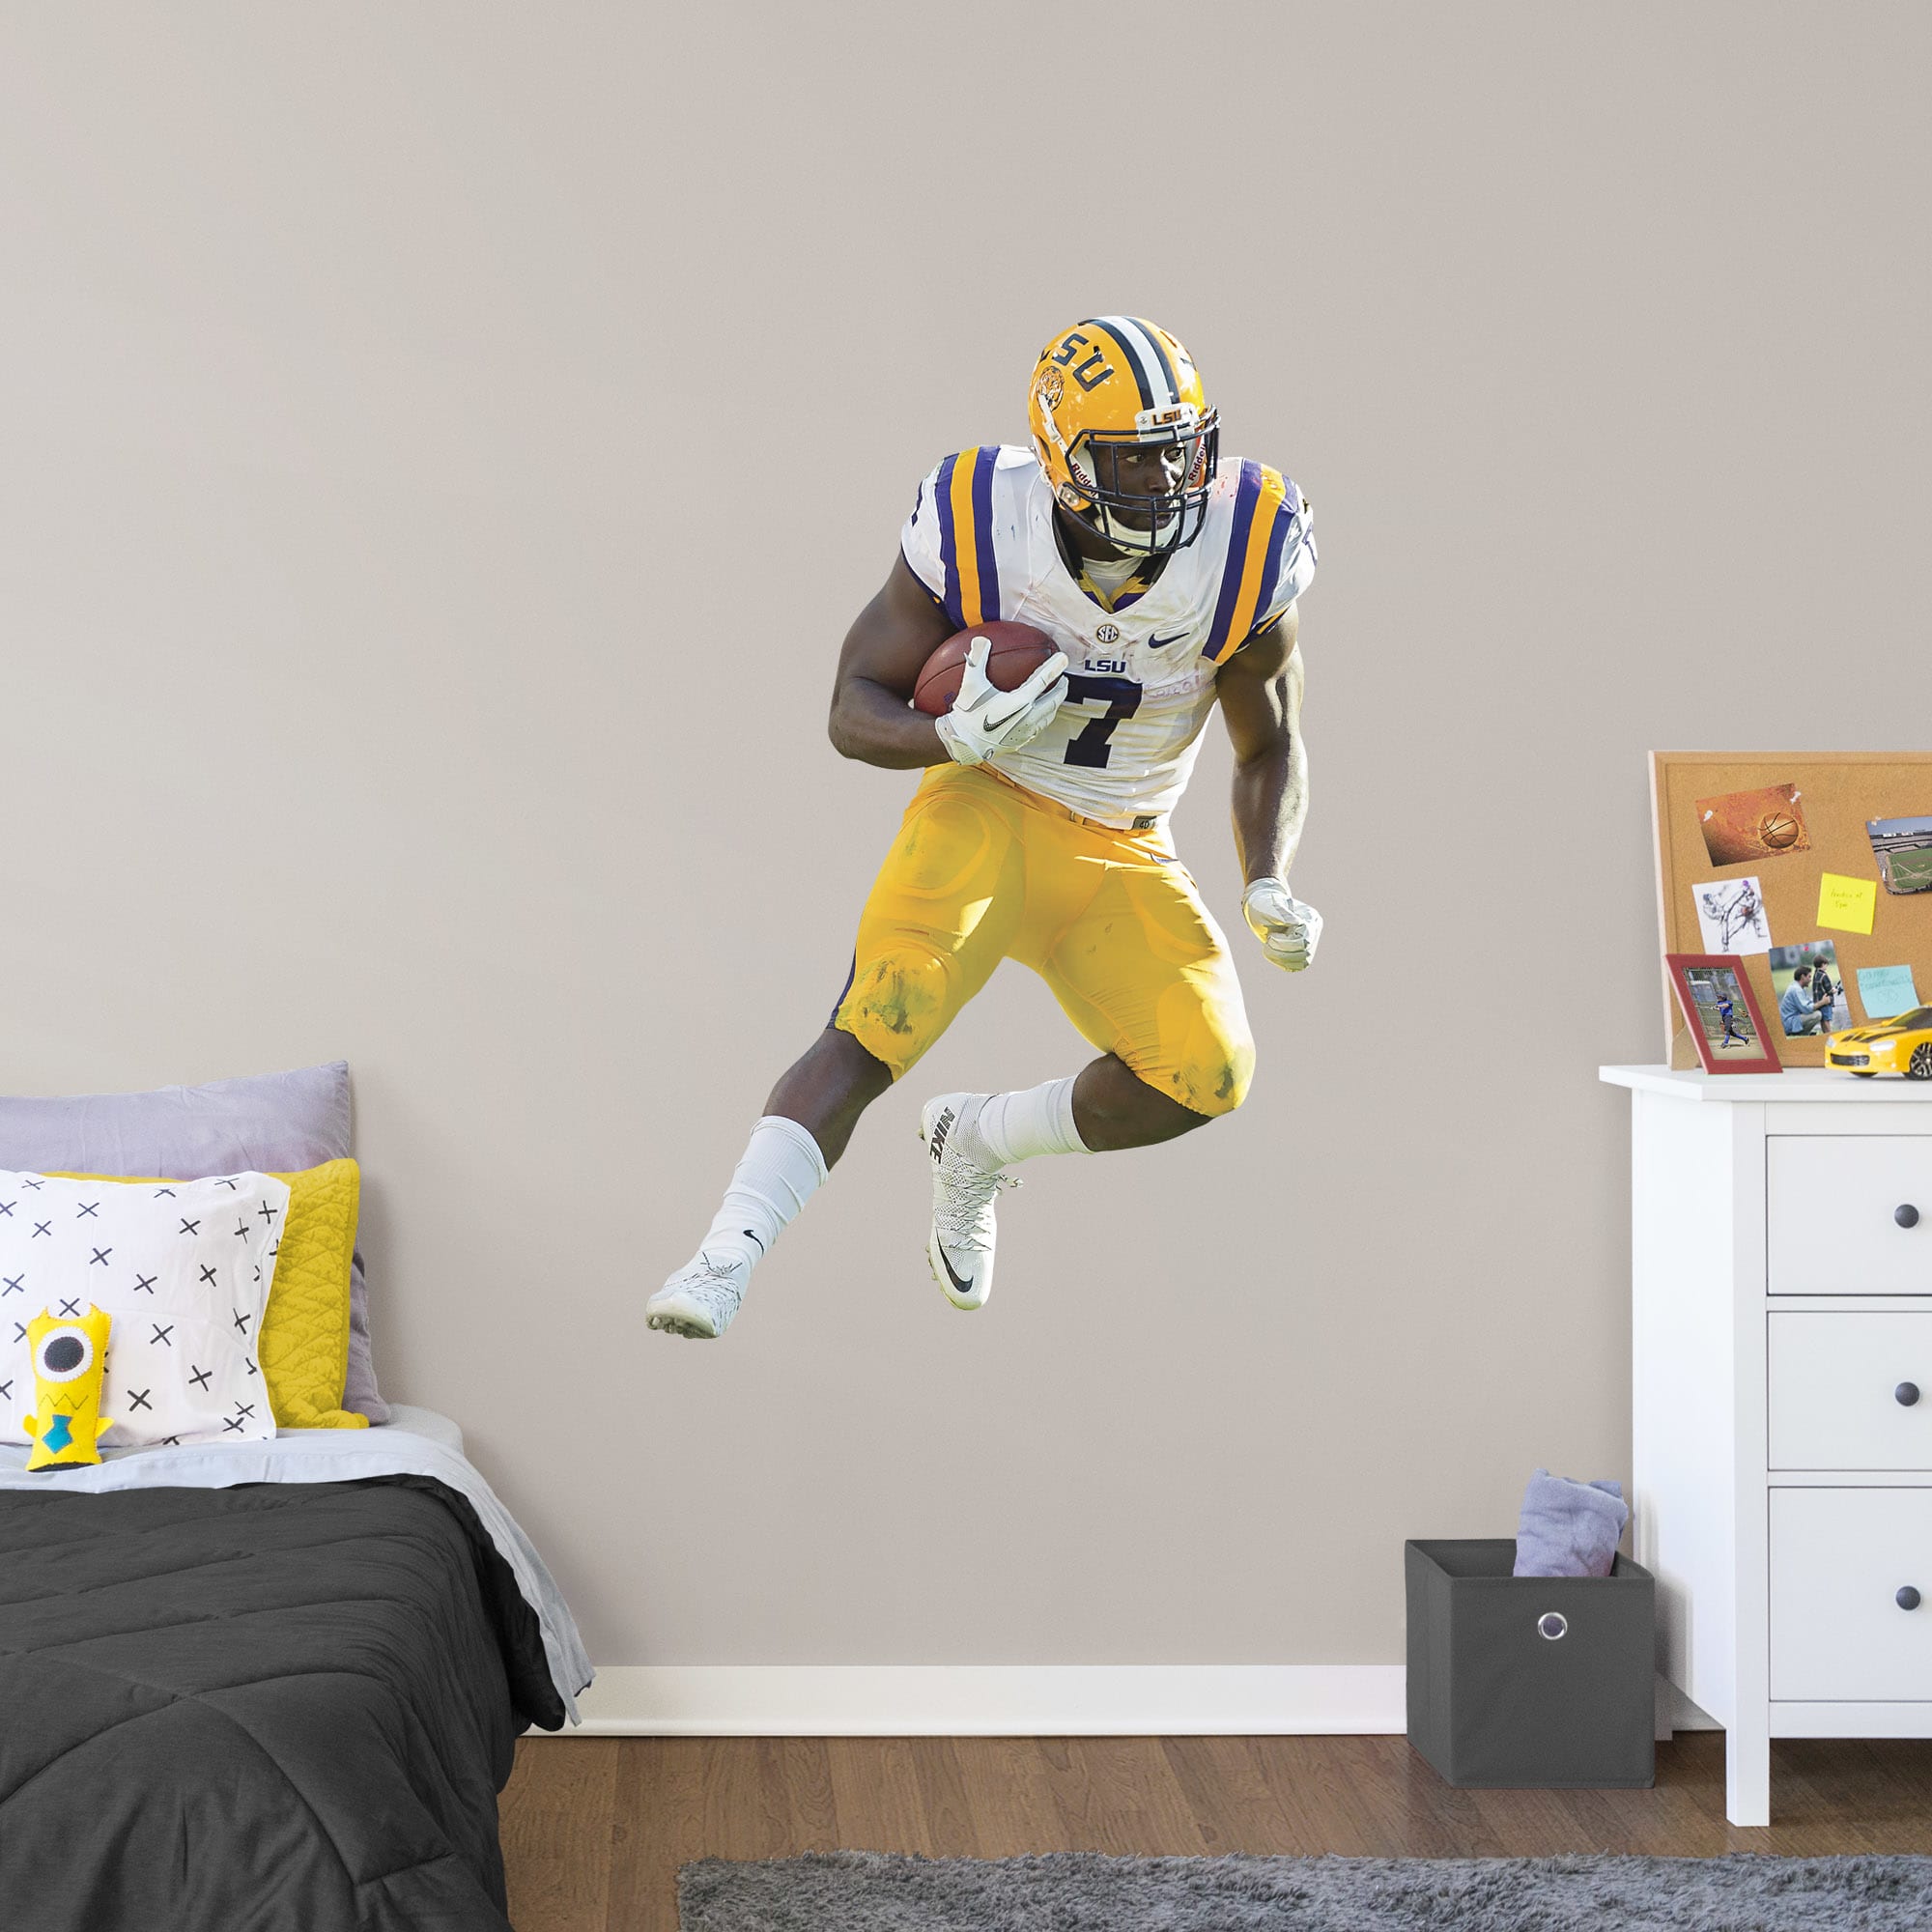 Leonard Fournette for LSU Tigers: LSU - Officially Licensed Removable Wall Decal Giant Athlete + 2 Decals (34"W x 51"H) by Fathe